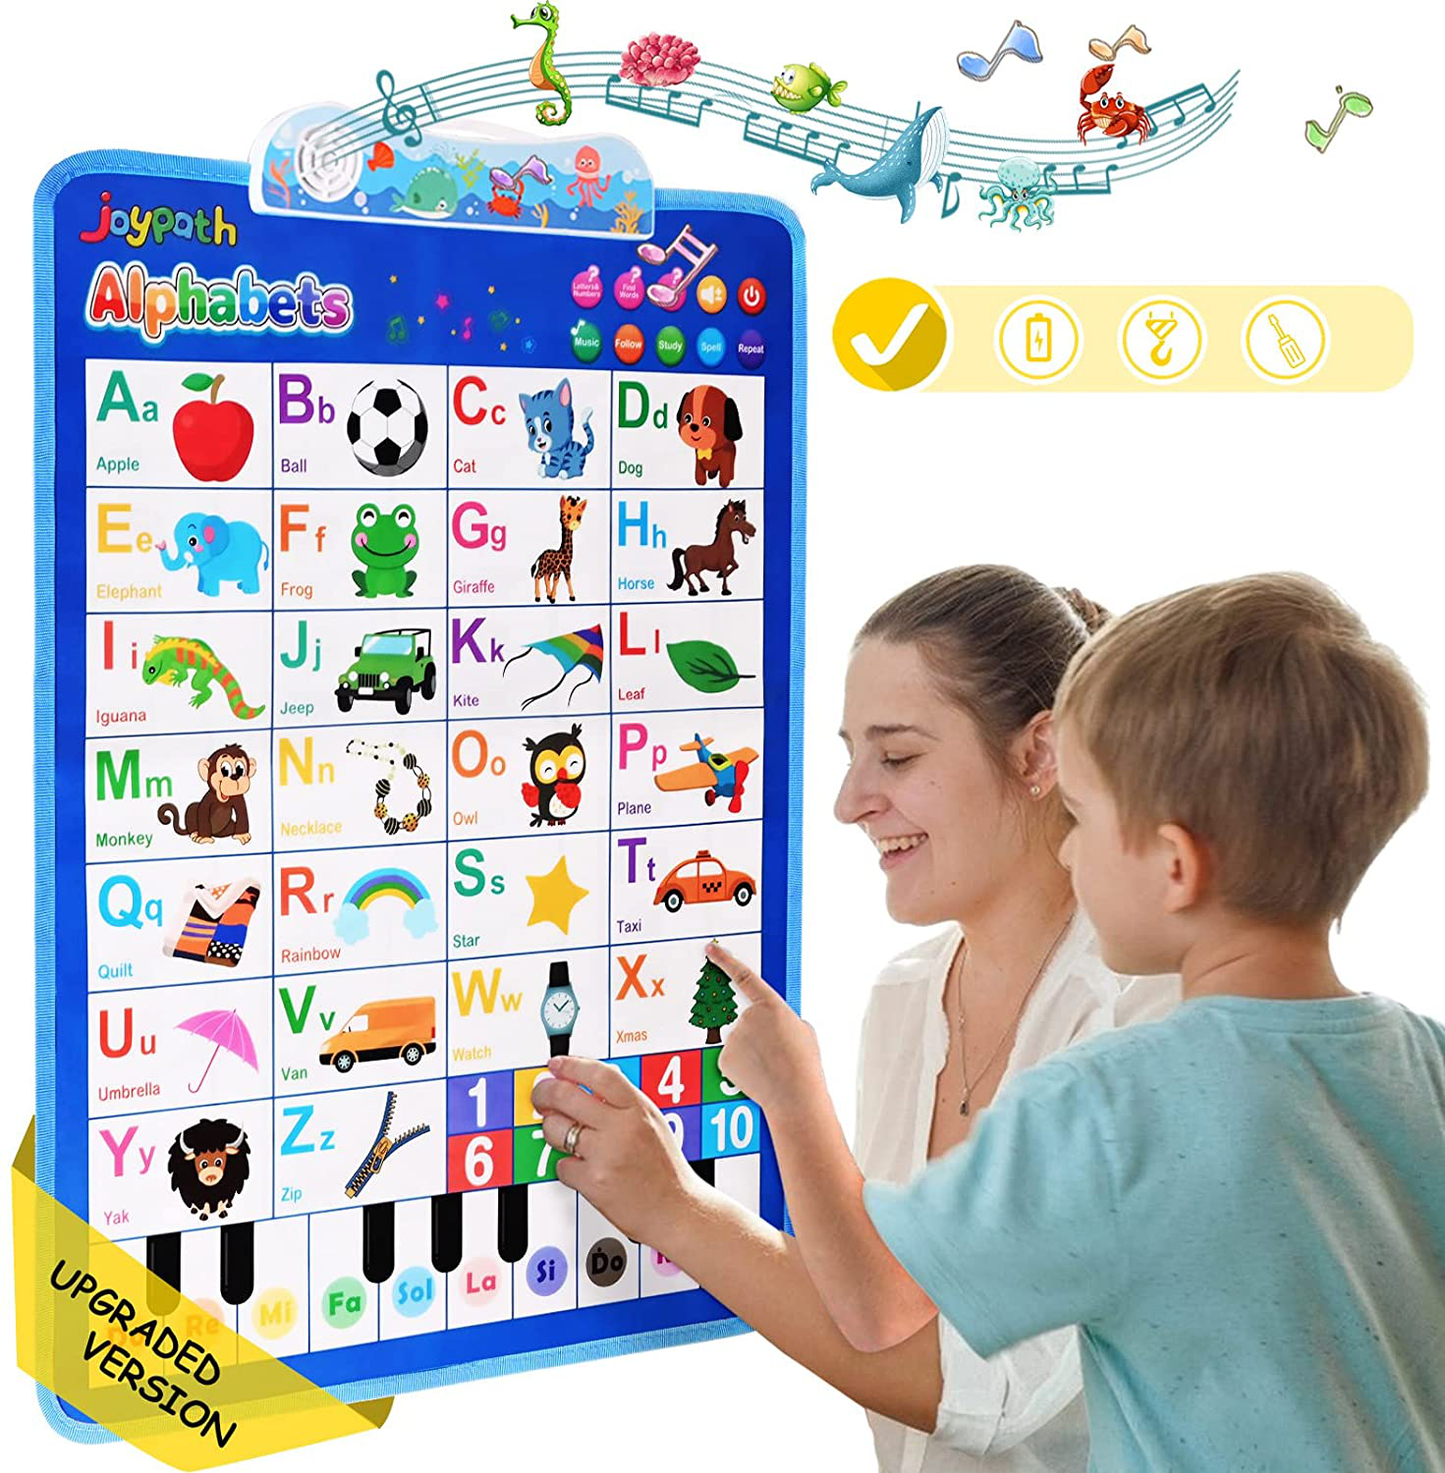 joypath Electronic Interactive Alphabet Wall Chart, Talking ABC, 123s, Piano Tone, Music Learning Poster, Preschool Early Educational Toddler Toy, Gifts for Age 3 Year Old Boys Girls Kids